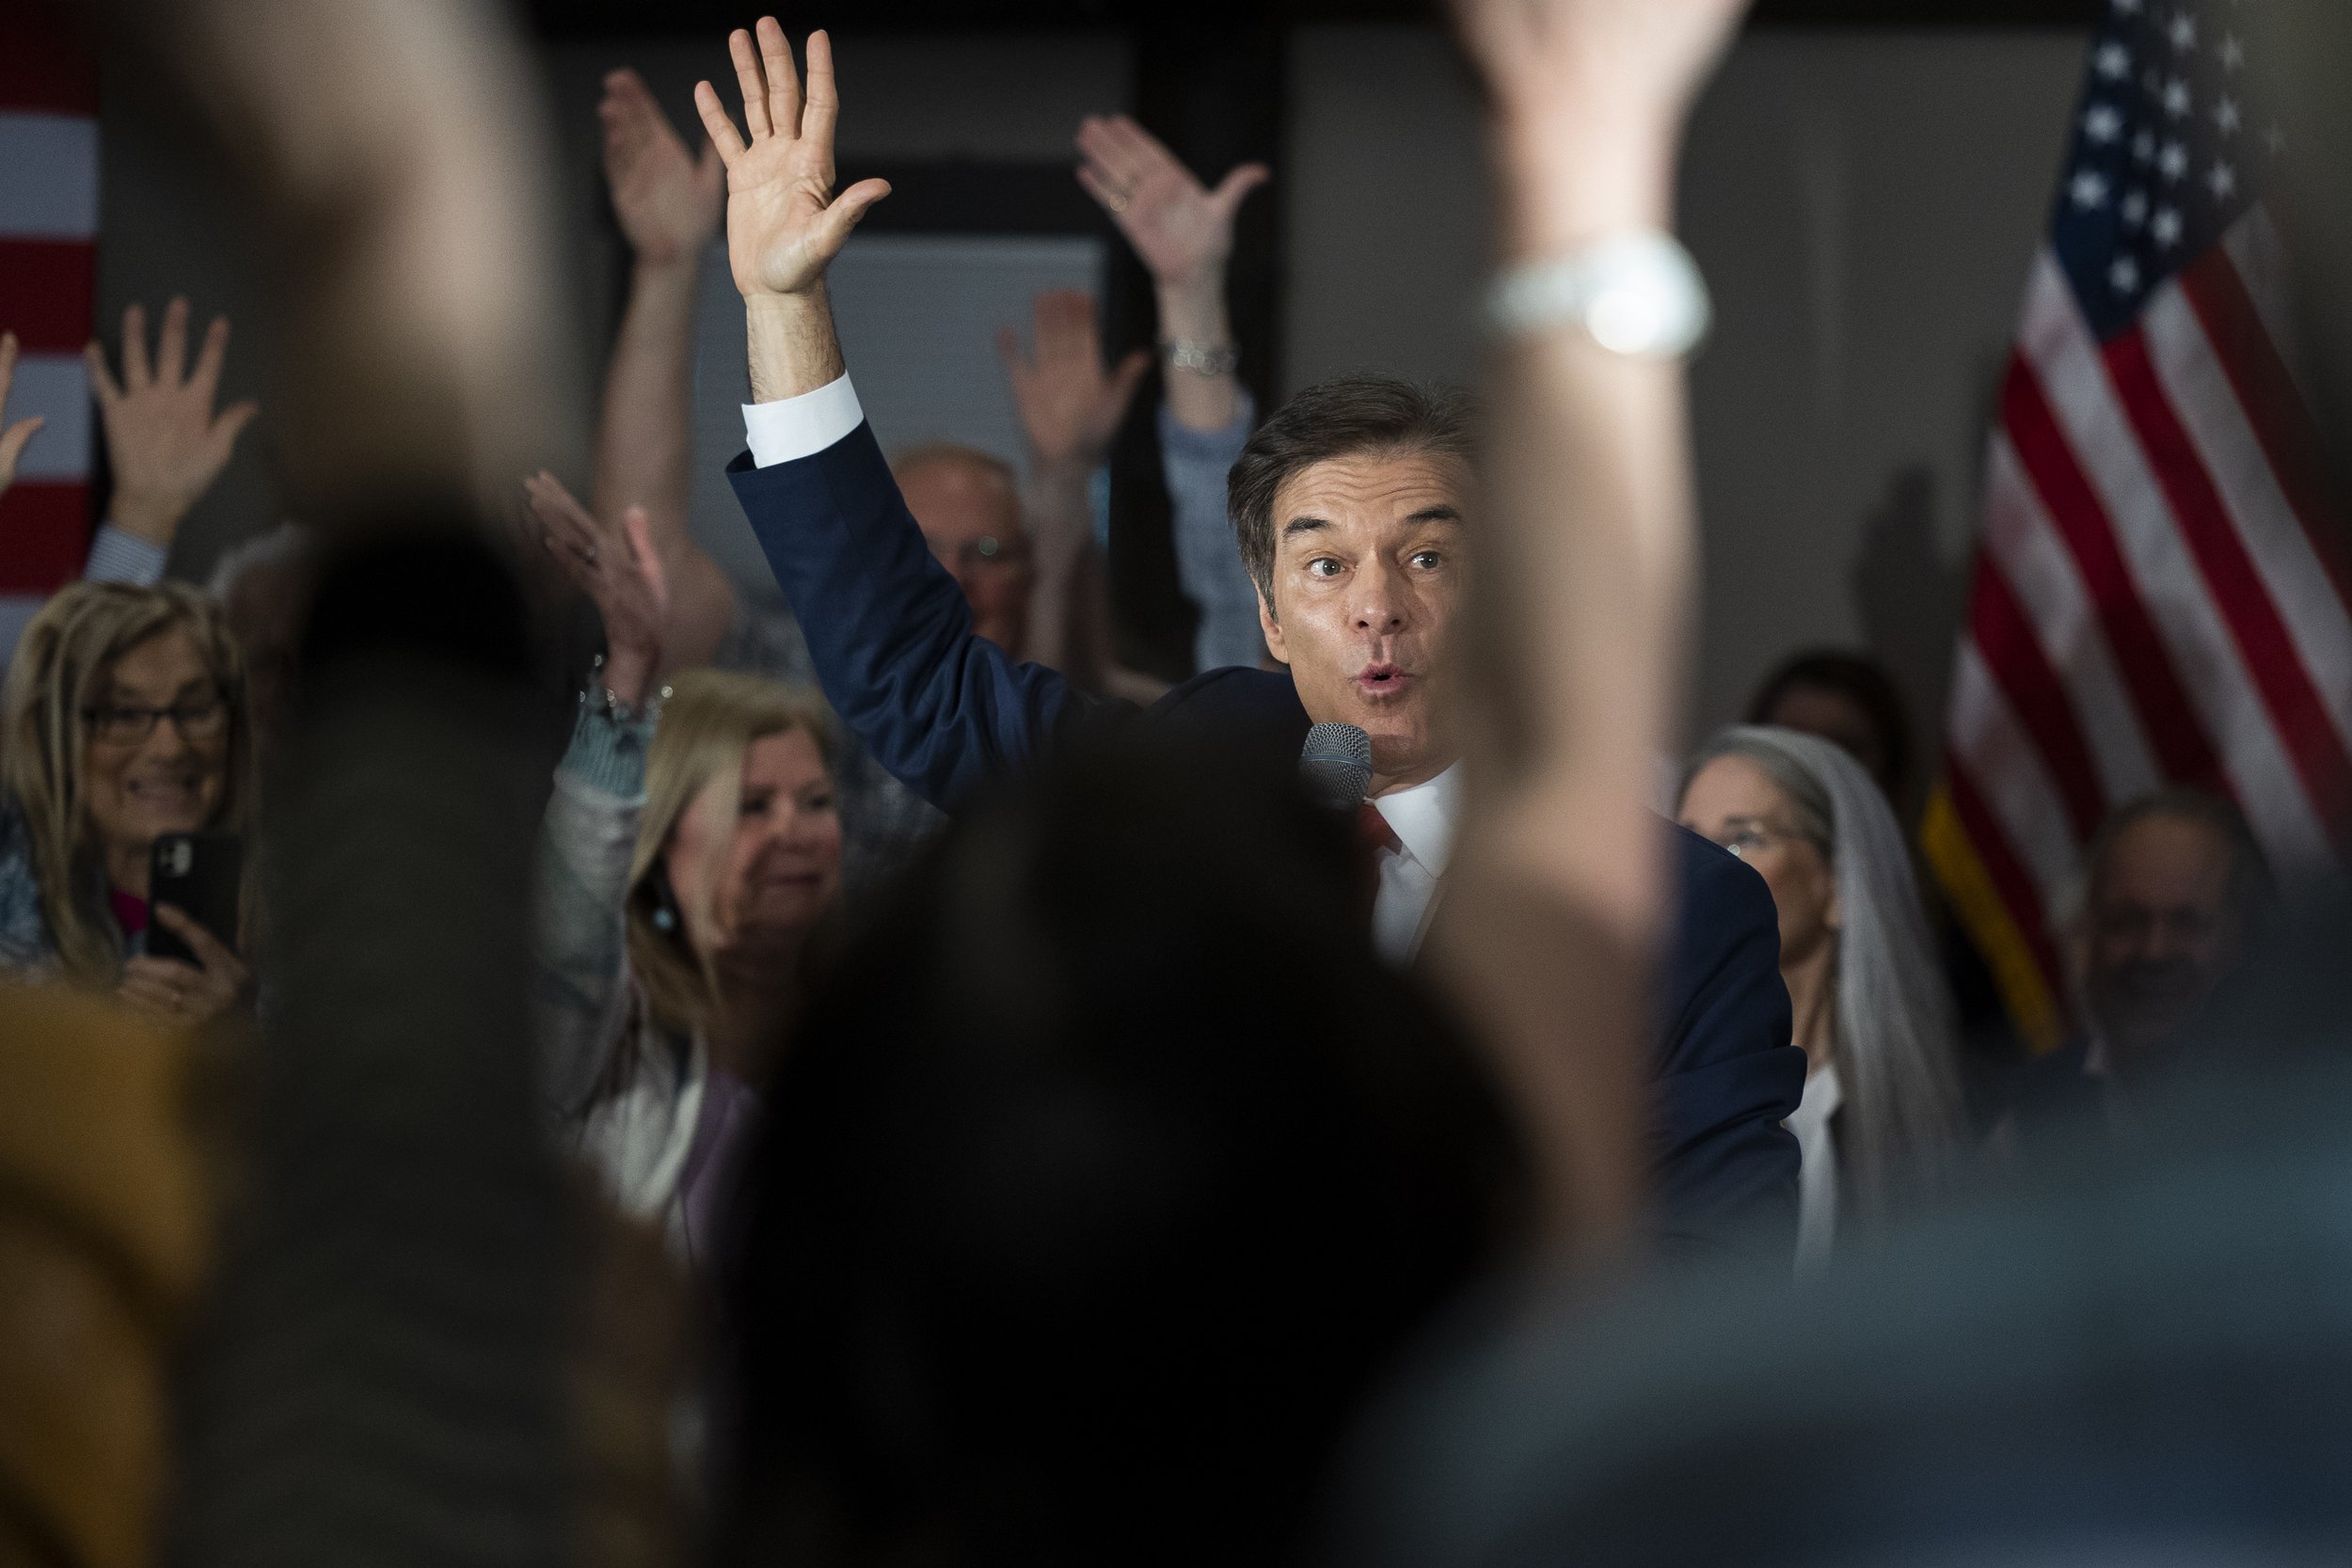  Dr. Mehmet Oz, celebrity physician and U.S. Republican Senate candidate for Pennsylvania, asks supporters about their values at a town hall in Bell Blue, Pennsylvania, US, on Monday, May 16, 2022. (On assignment for Bloomberg) 